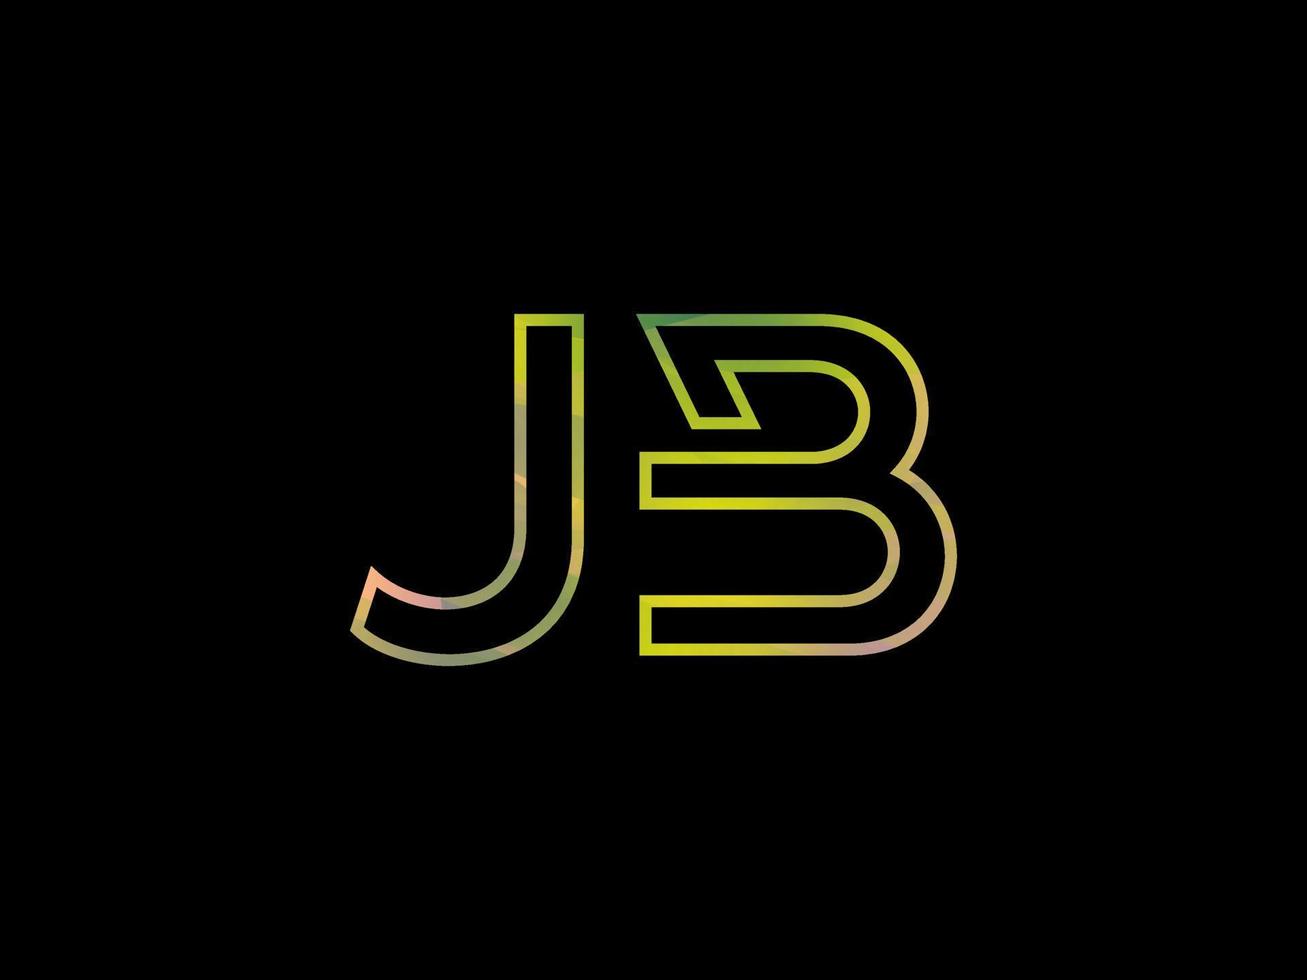 JB Letter Logo With Colorful Rainbow Texture Vector. Pro vector. vector